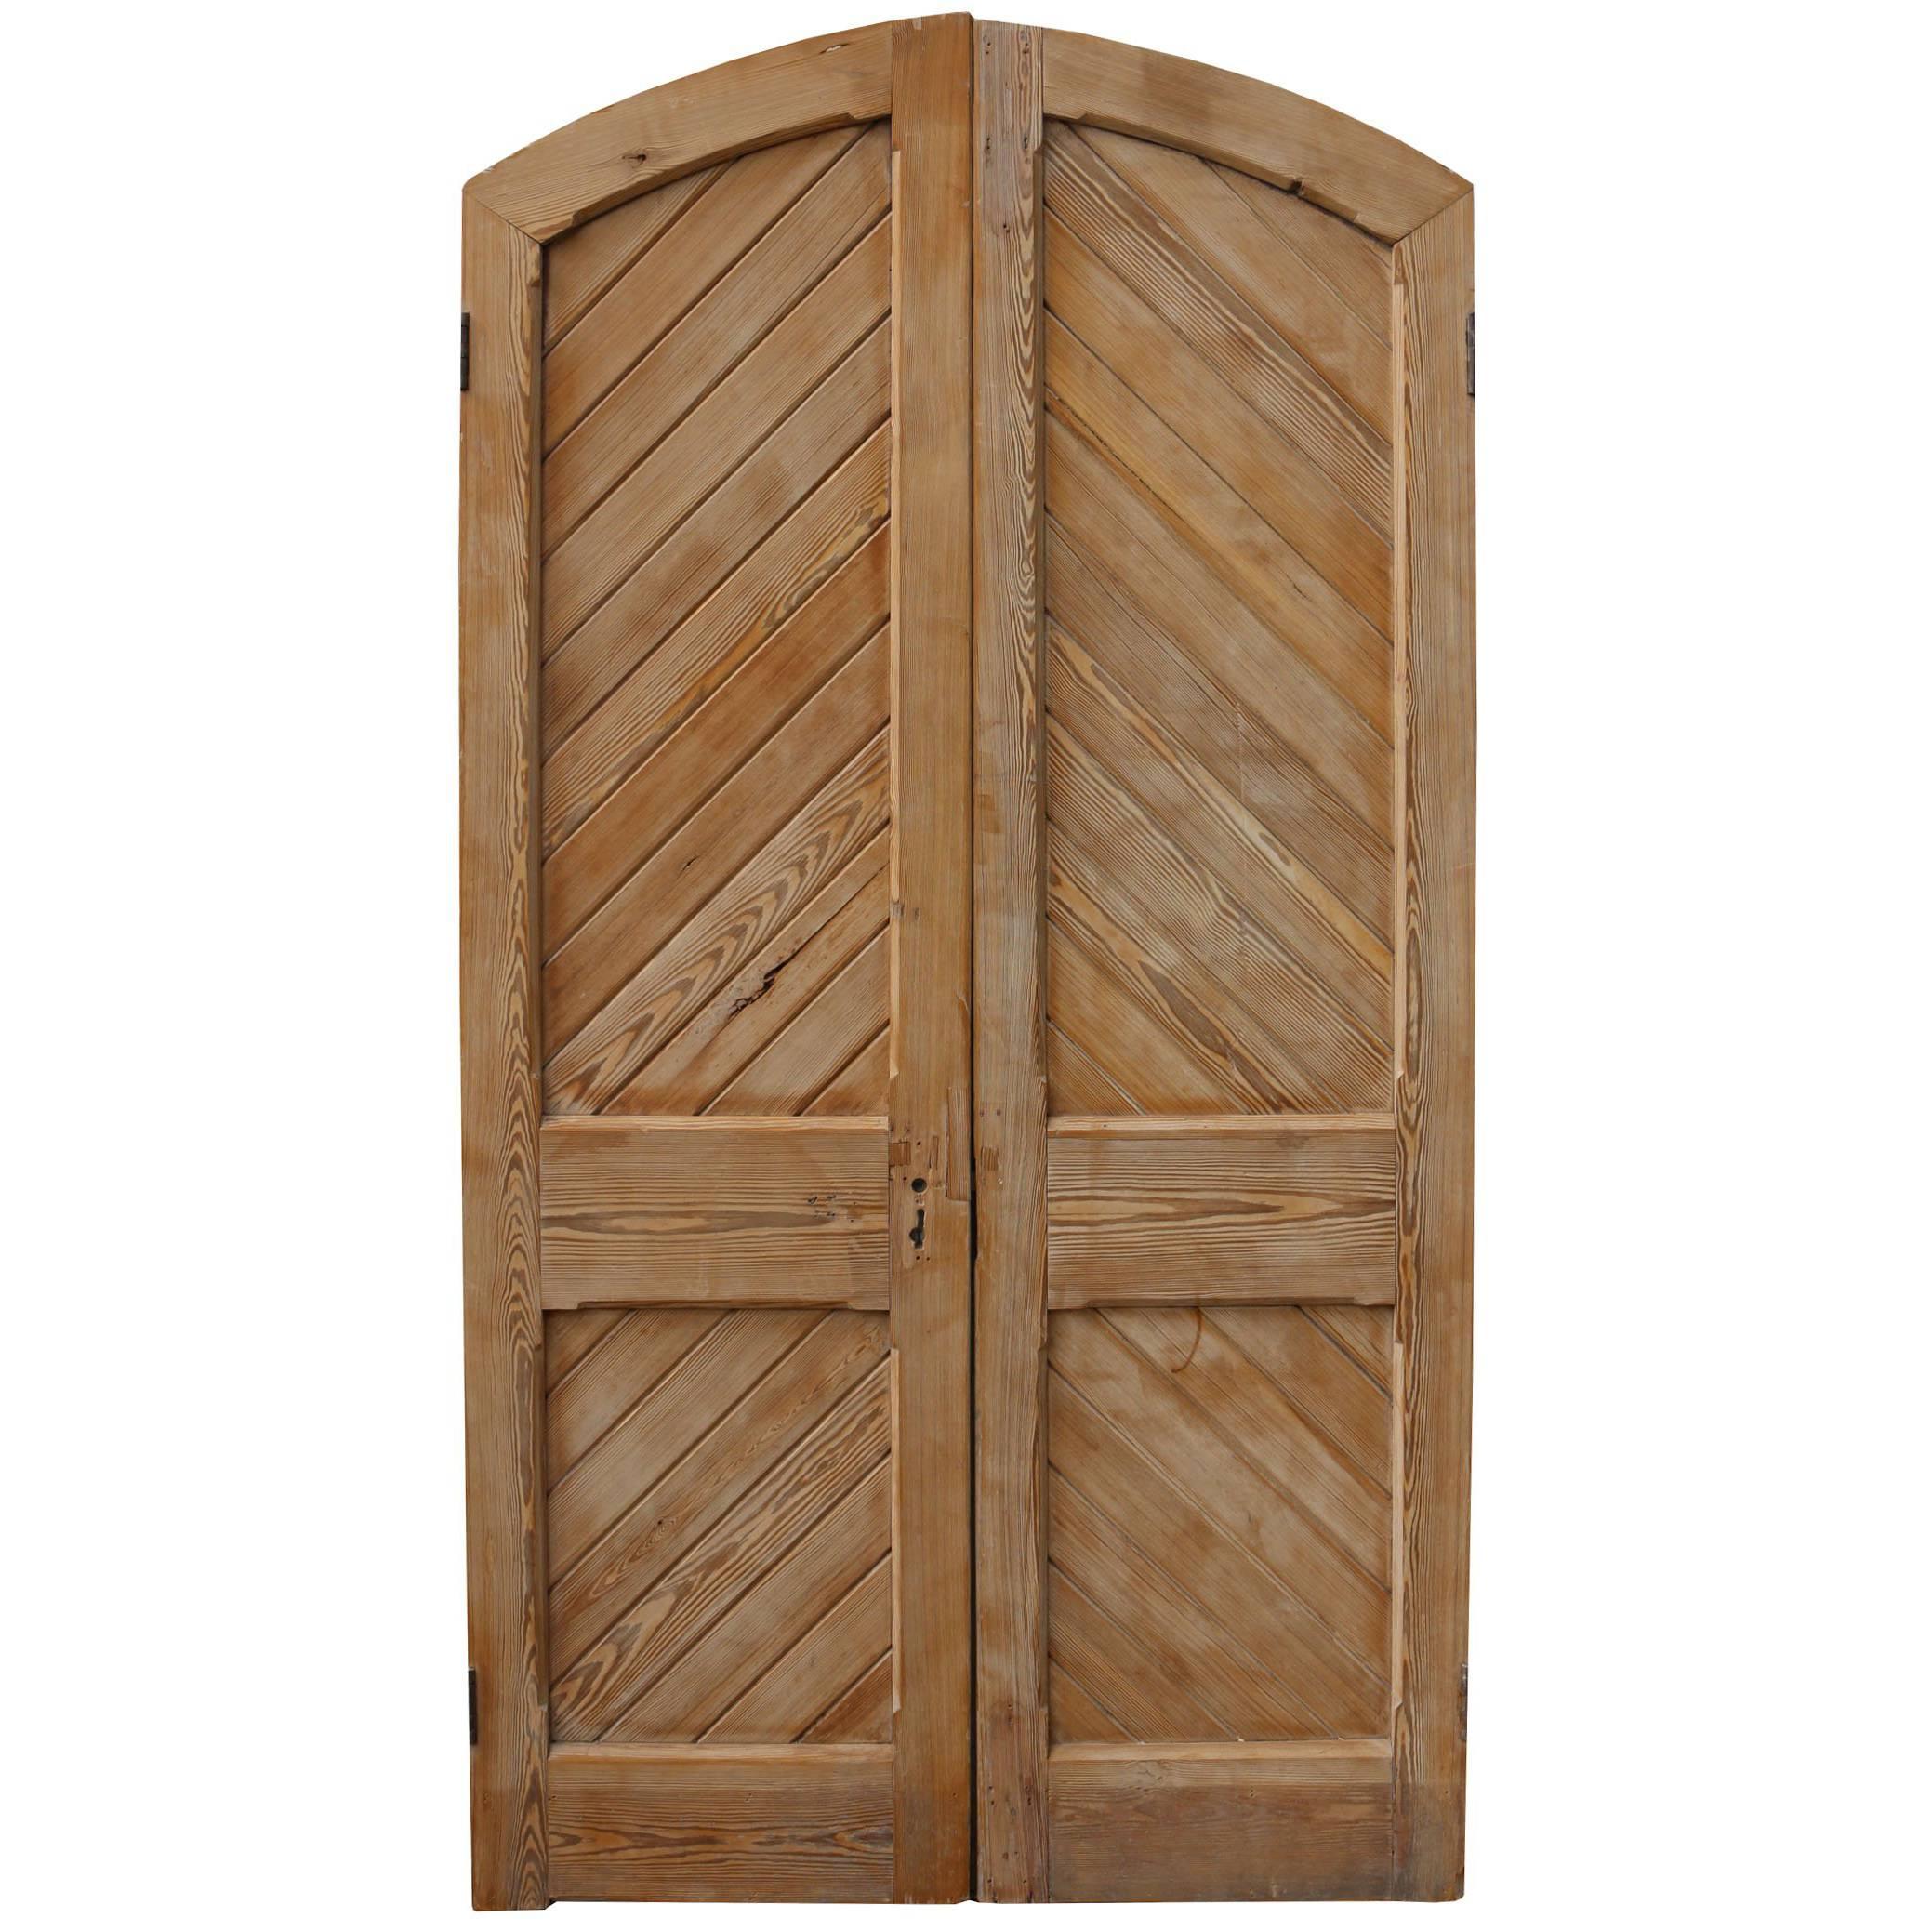 Pair of Antique Stripped Pine Exterior Arched Double Doors